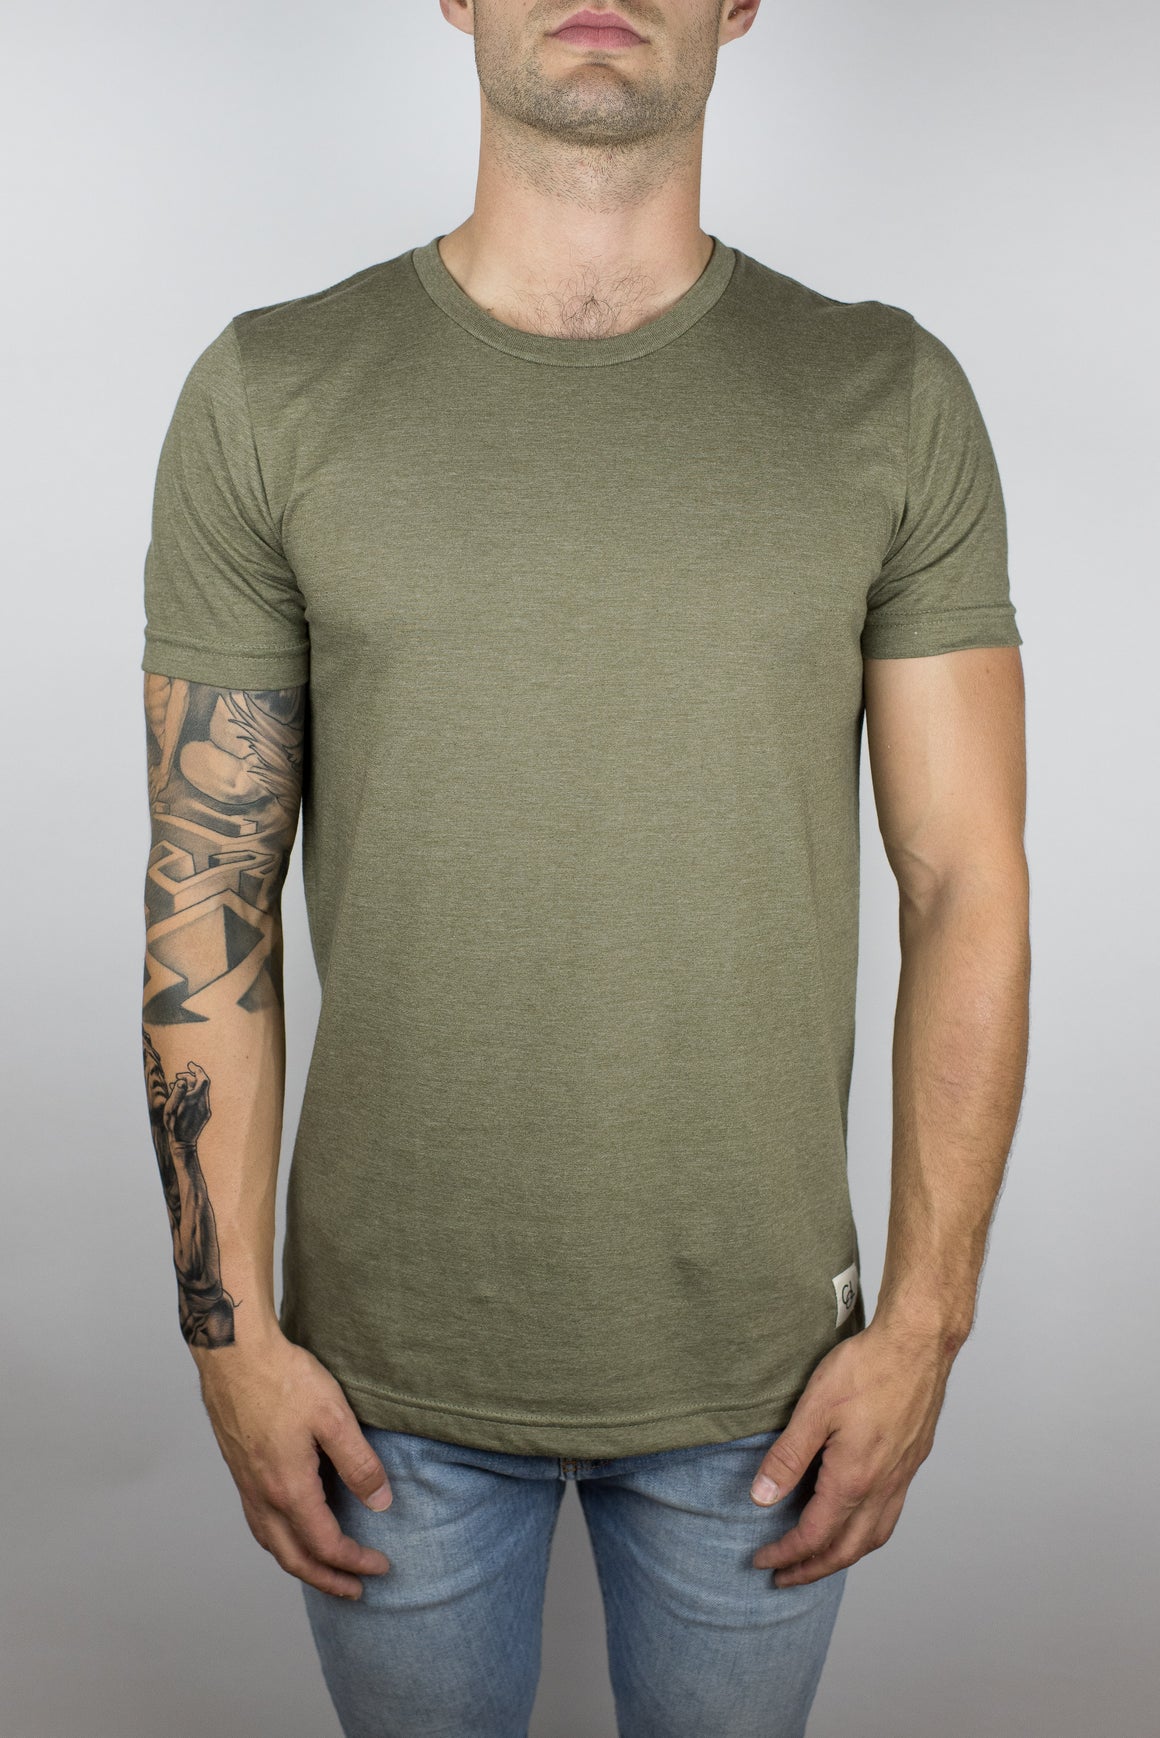 The Fuel Heather in Olive